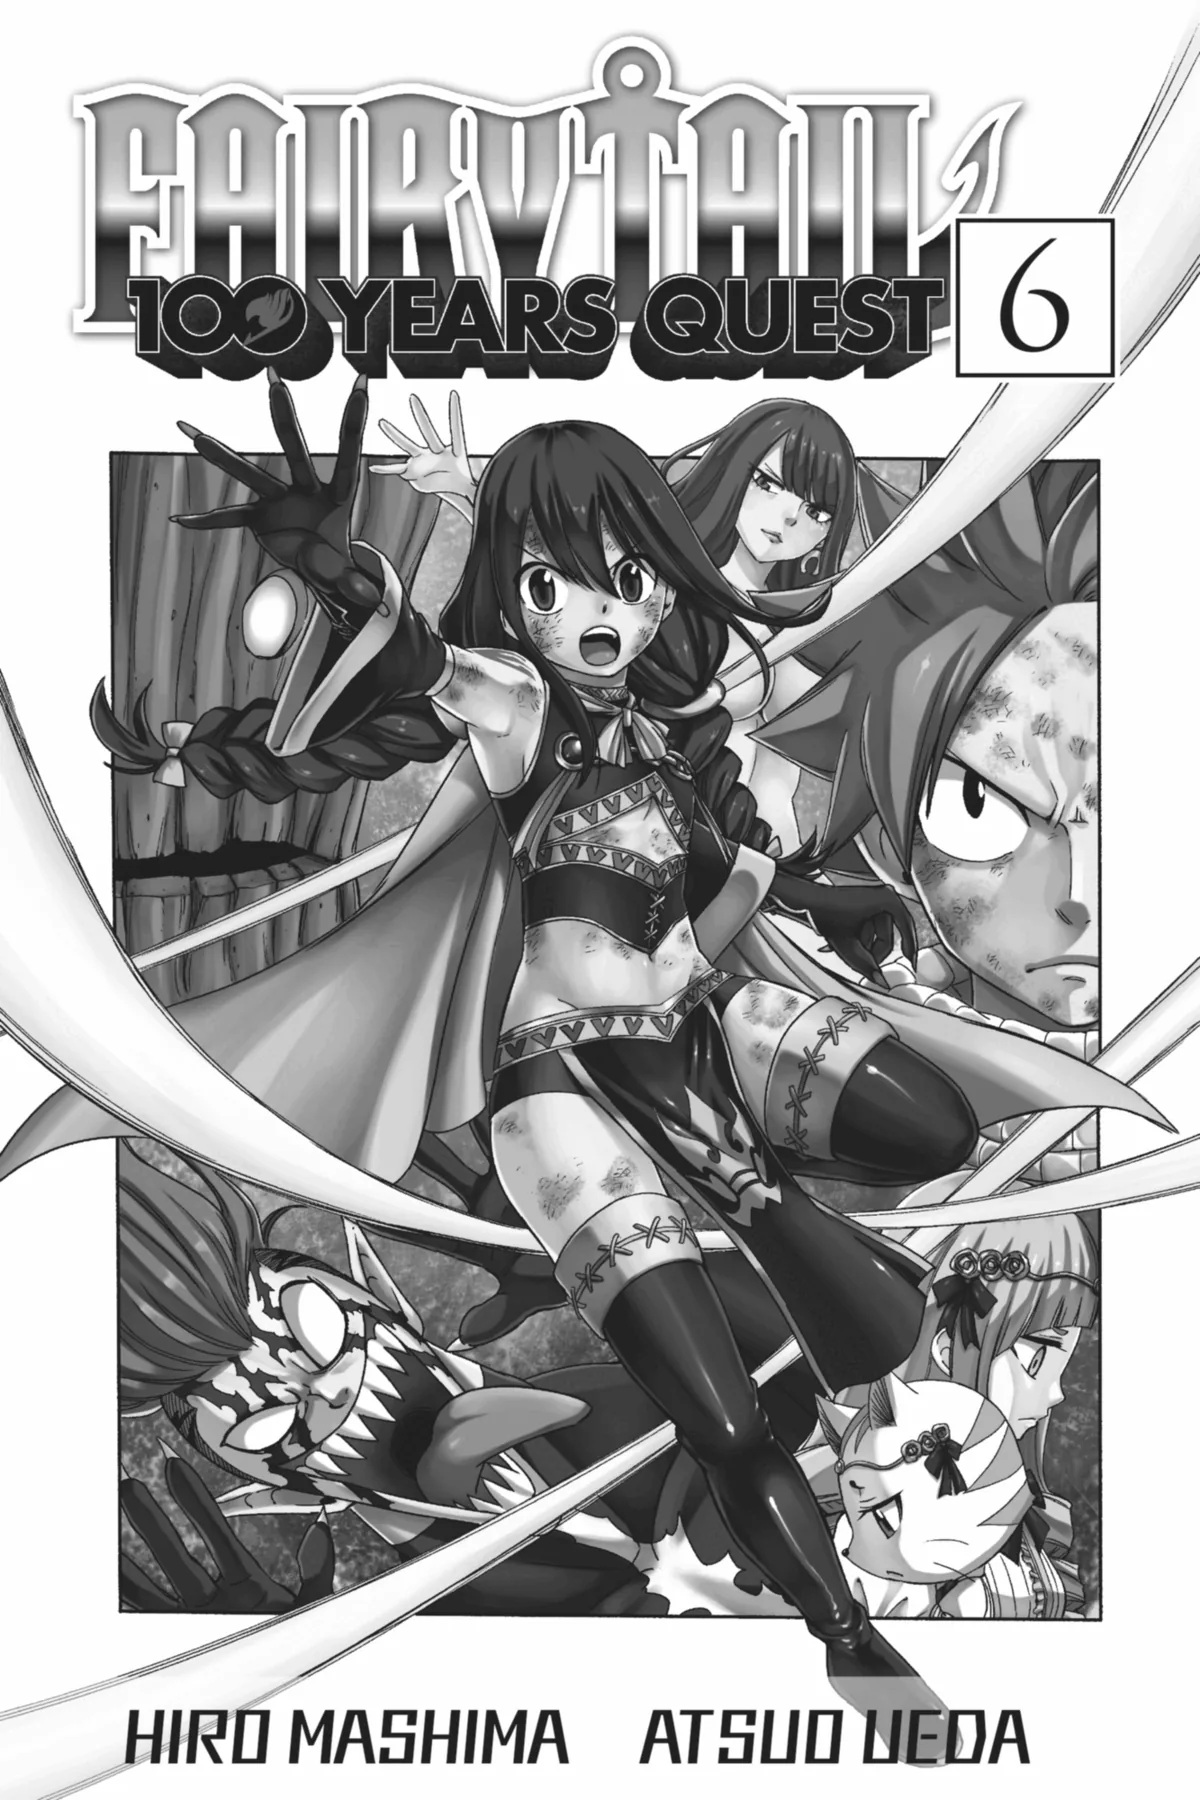 FAIRY TAIL: 100 Years Quest, Volume 6